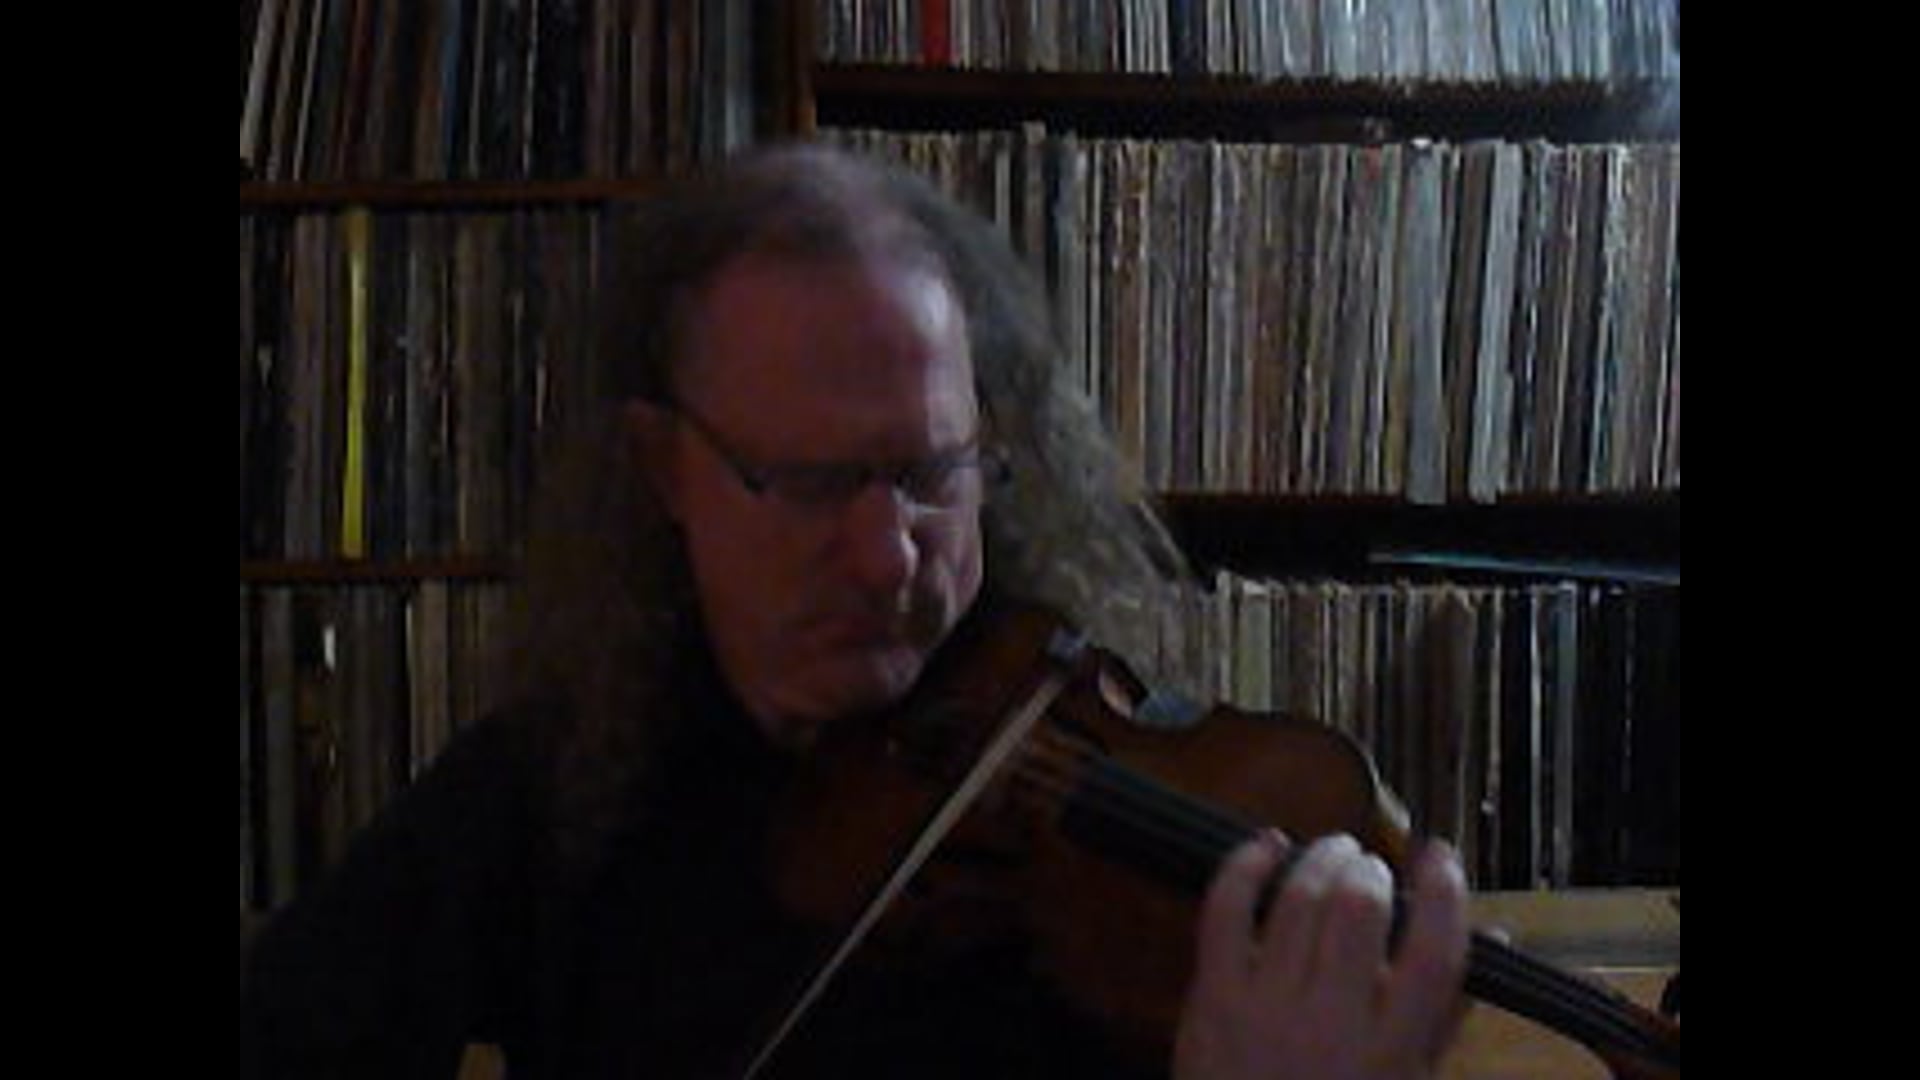 Promotional video thumbnail 1 for Gregor Kitzis Violin and Musical Saw